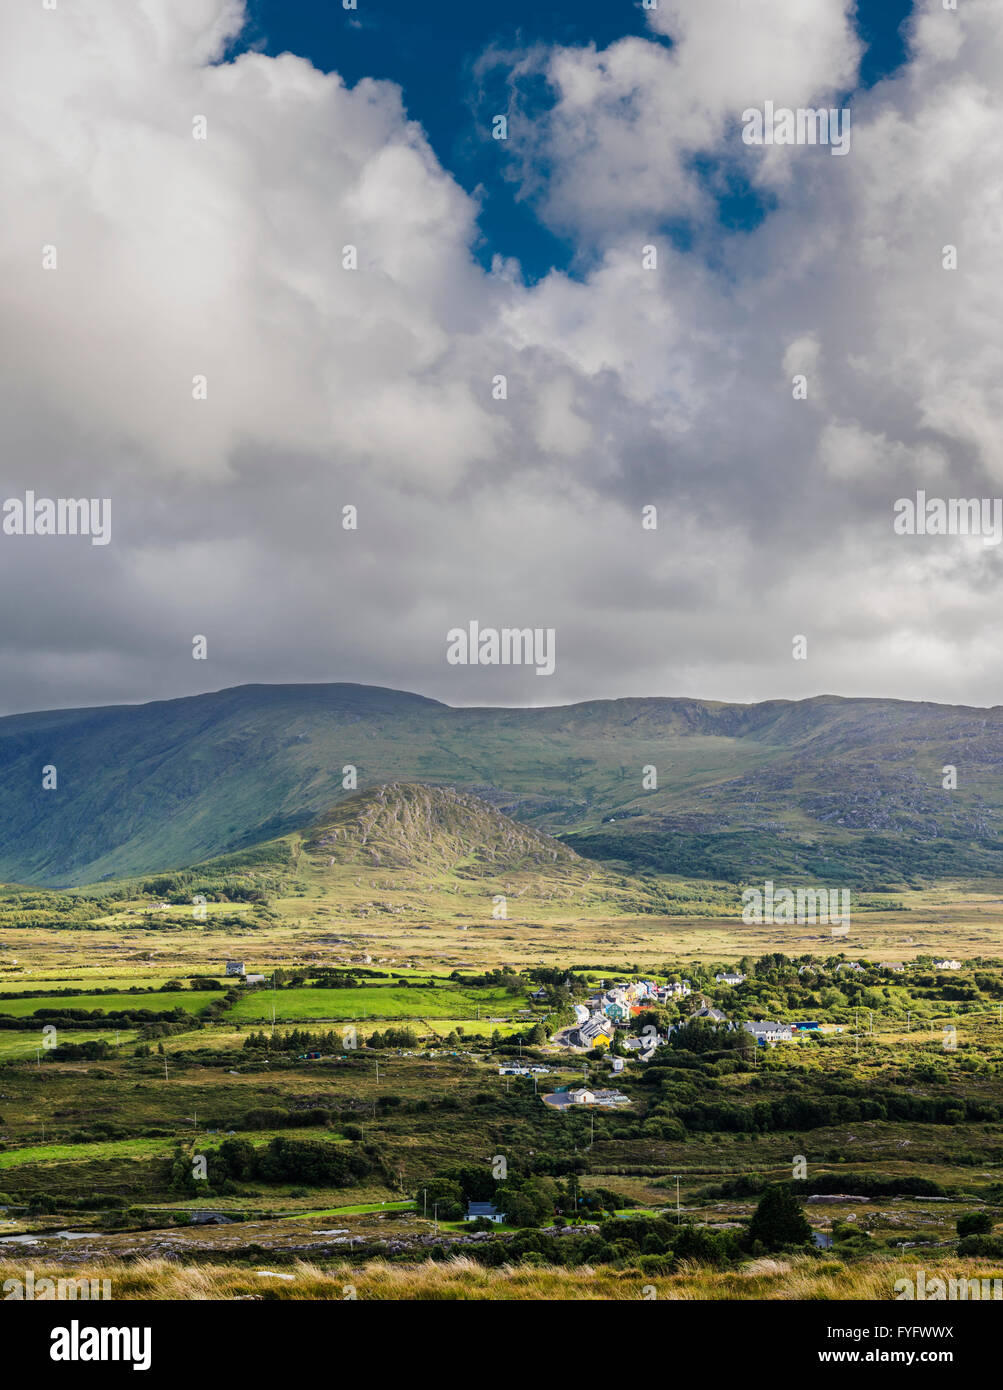 View over the picturesque and colourful village of Ardgroom from Kilcatherine, Beara Peninsula, County Cork, Ireland Stock Photo